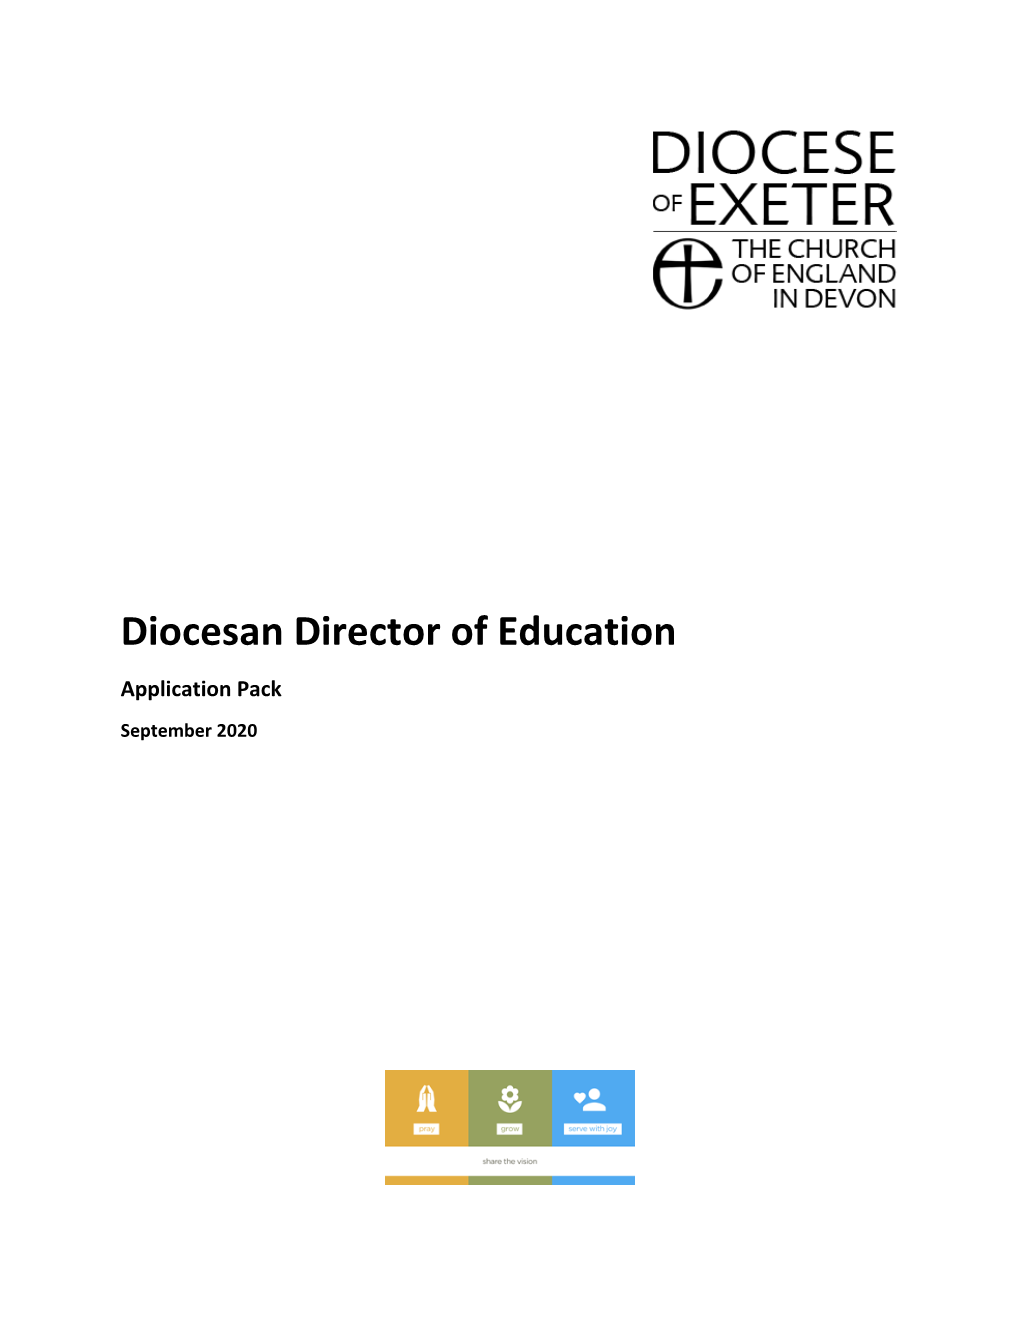 Diocesan Director of Education Application Pack September 2020